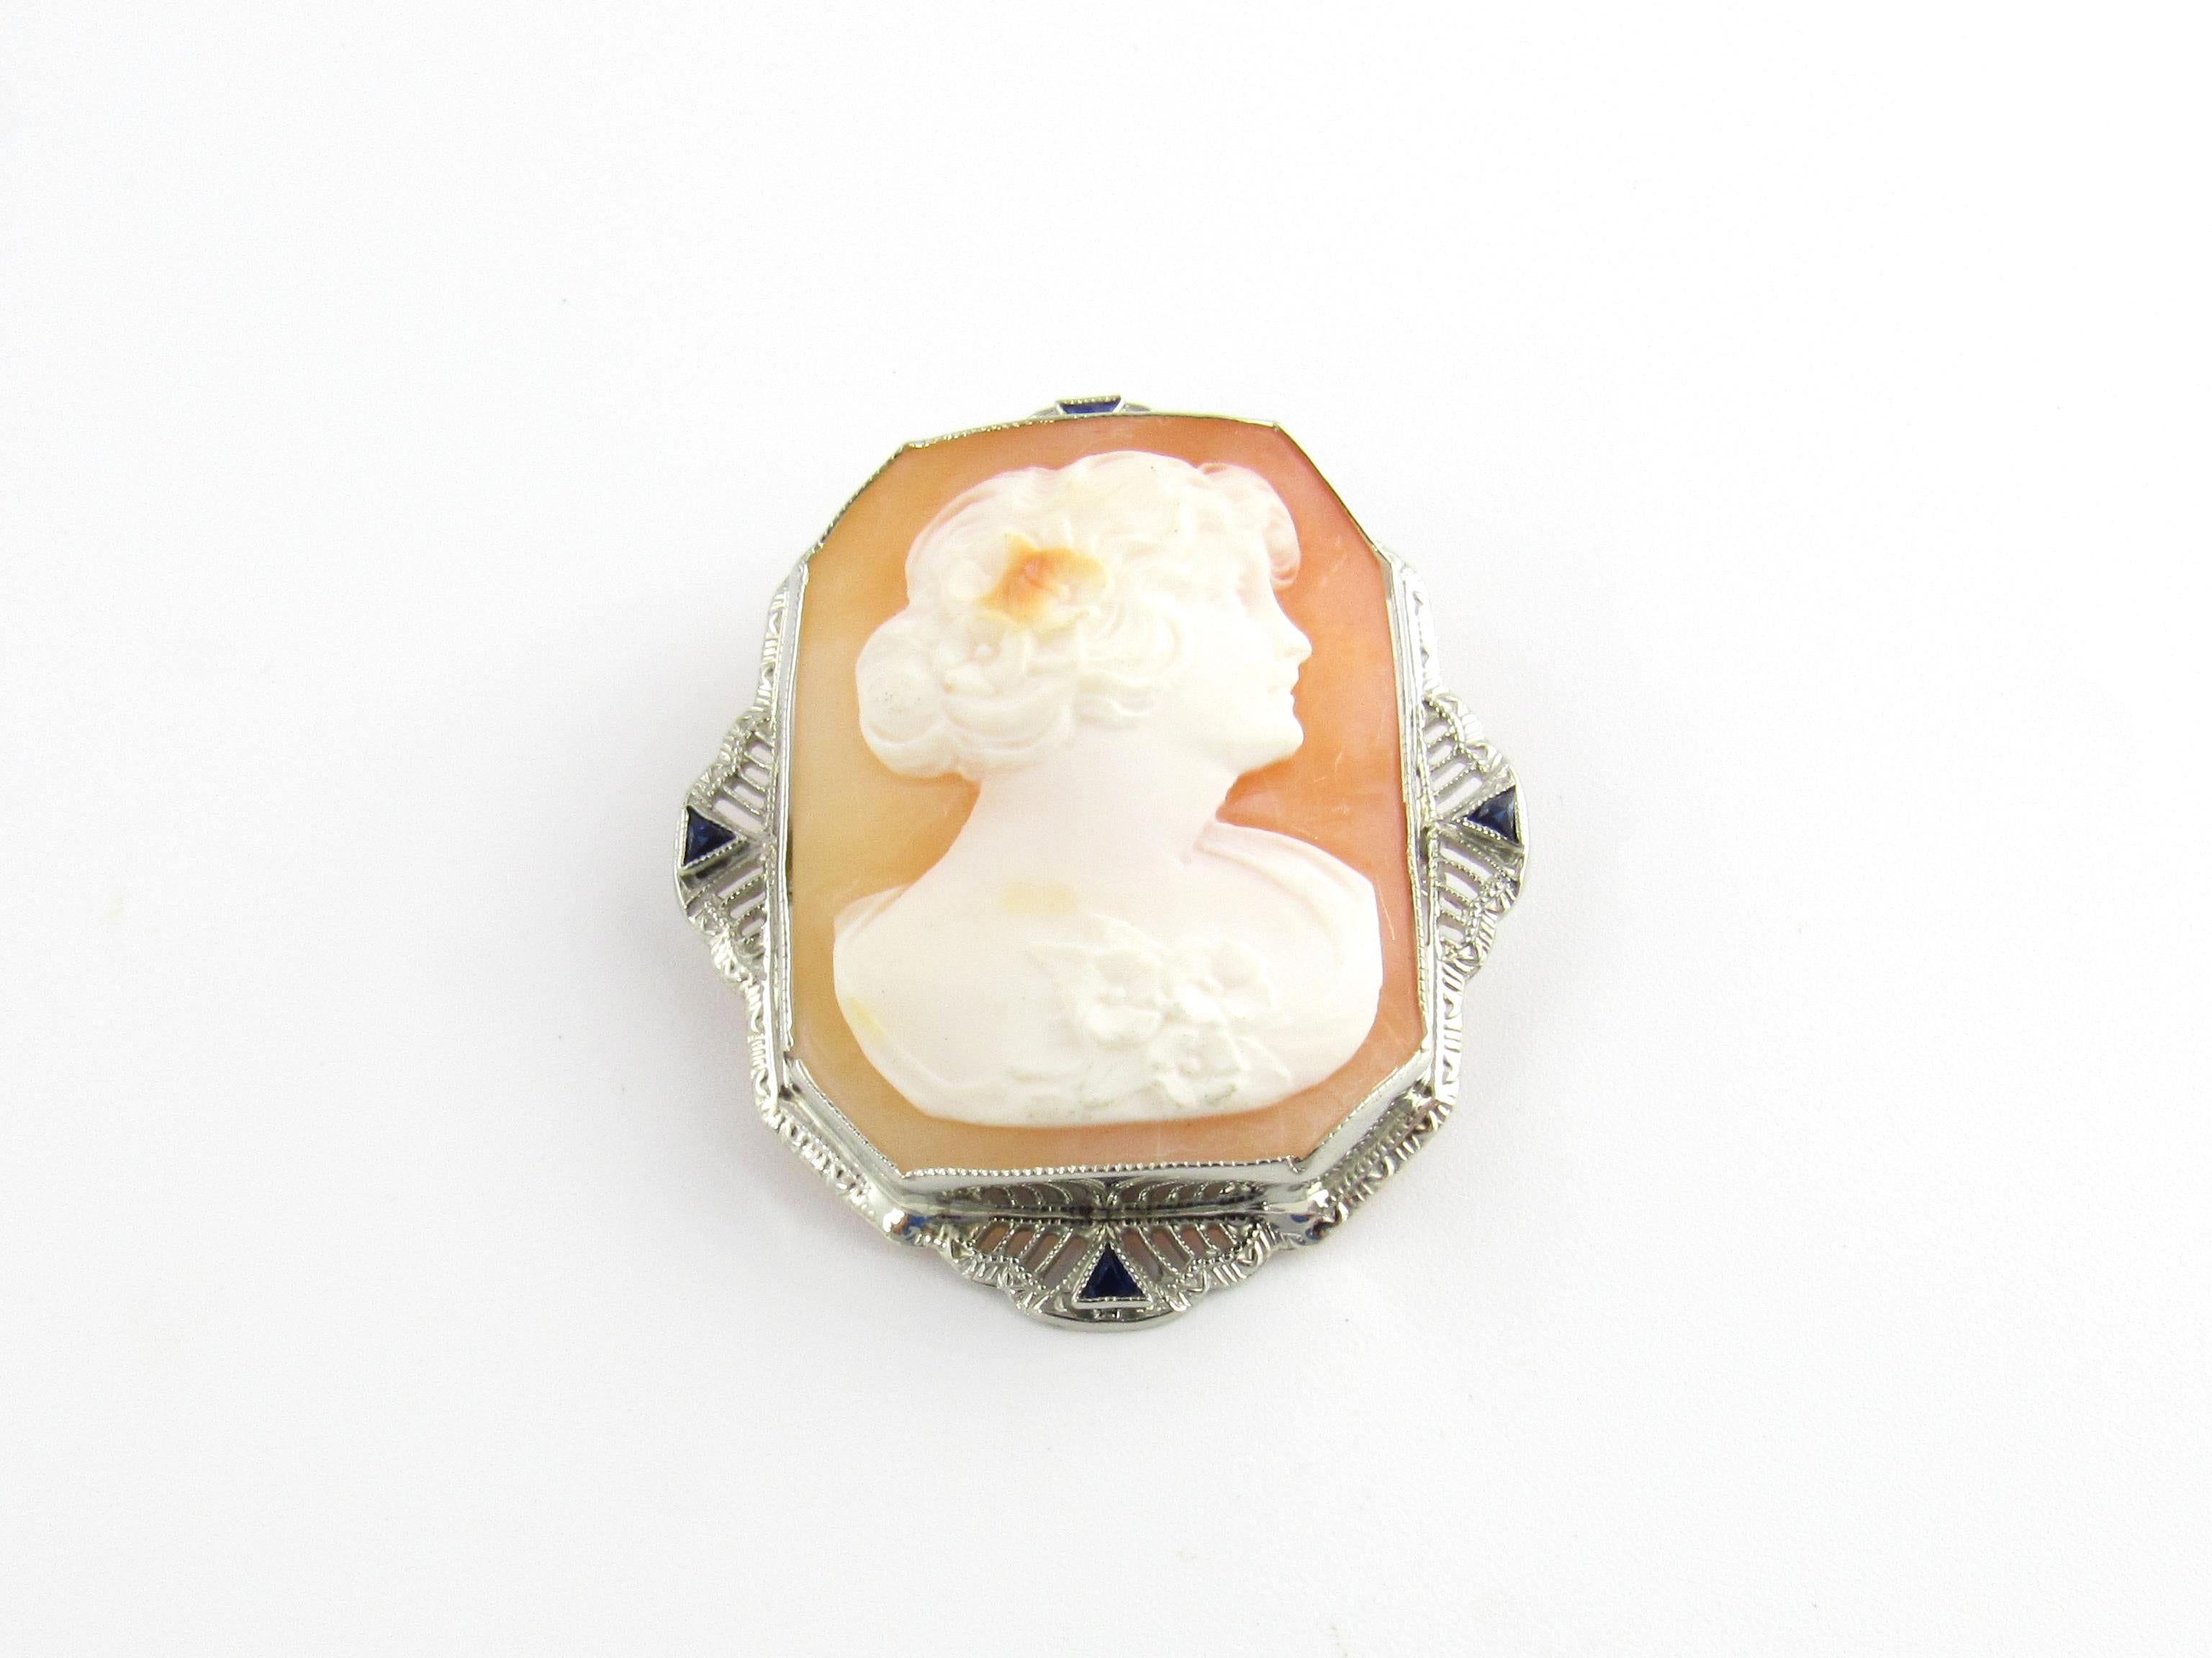 Vintage 14 Karat White Gold Cameo Brooch / Pendant

This elegant cameo features a lovely lady in profile framed in exquisite white gold filigree accented with four triangle cut sapphires. Can be worn as a brooch or a pendant.

Size: 38 mm x 33